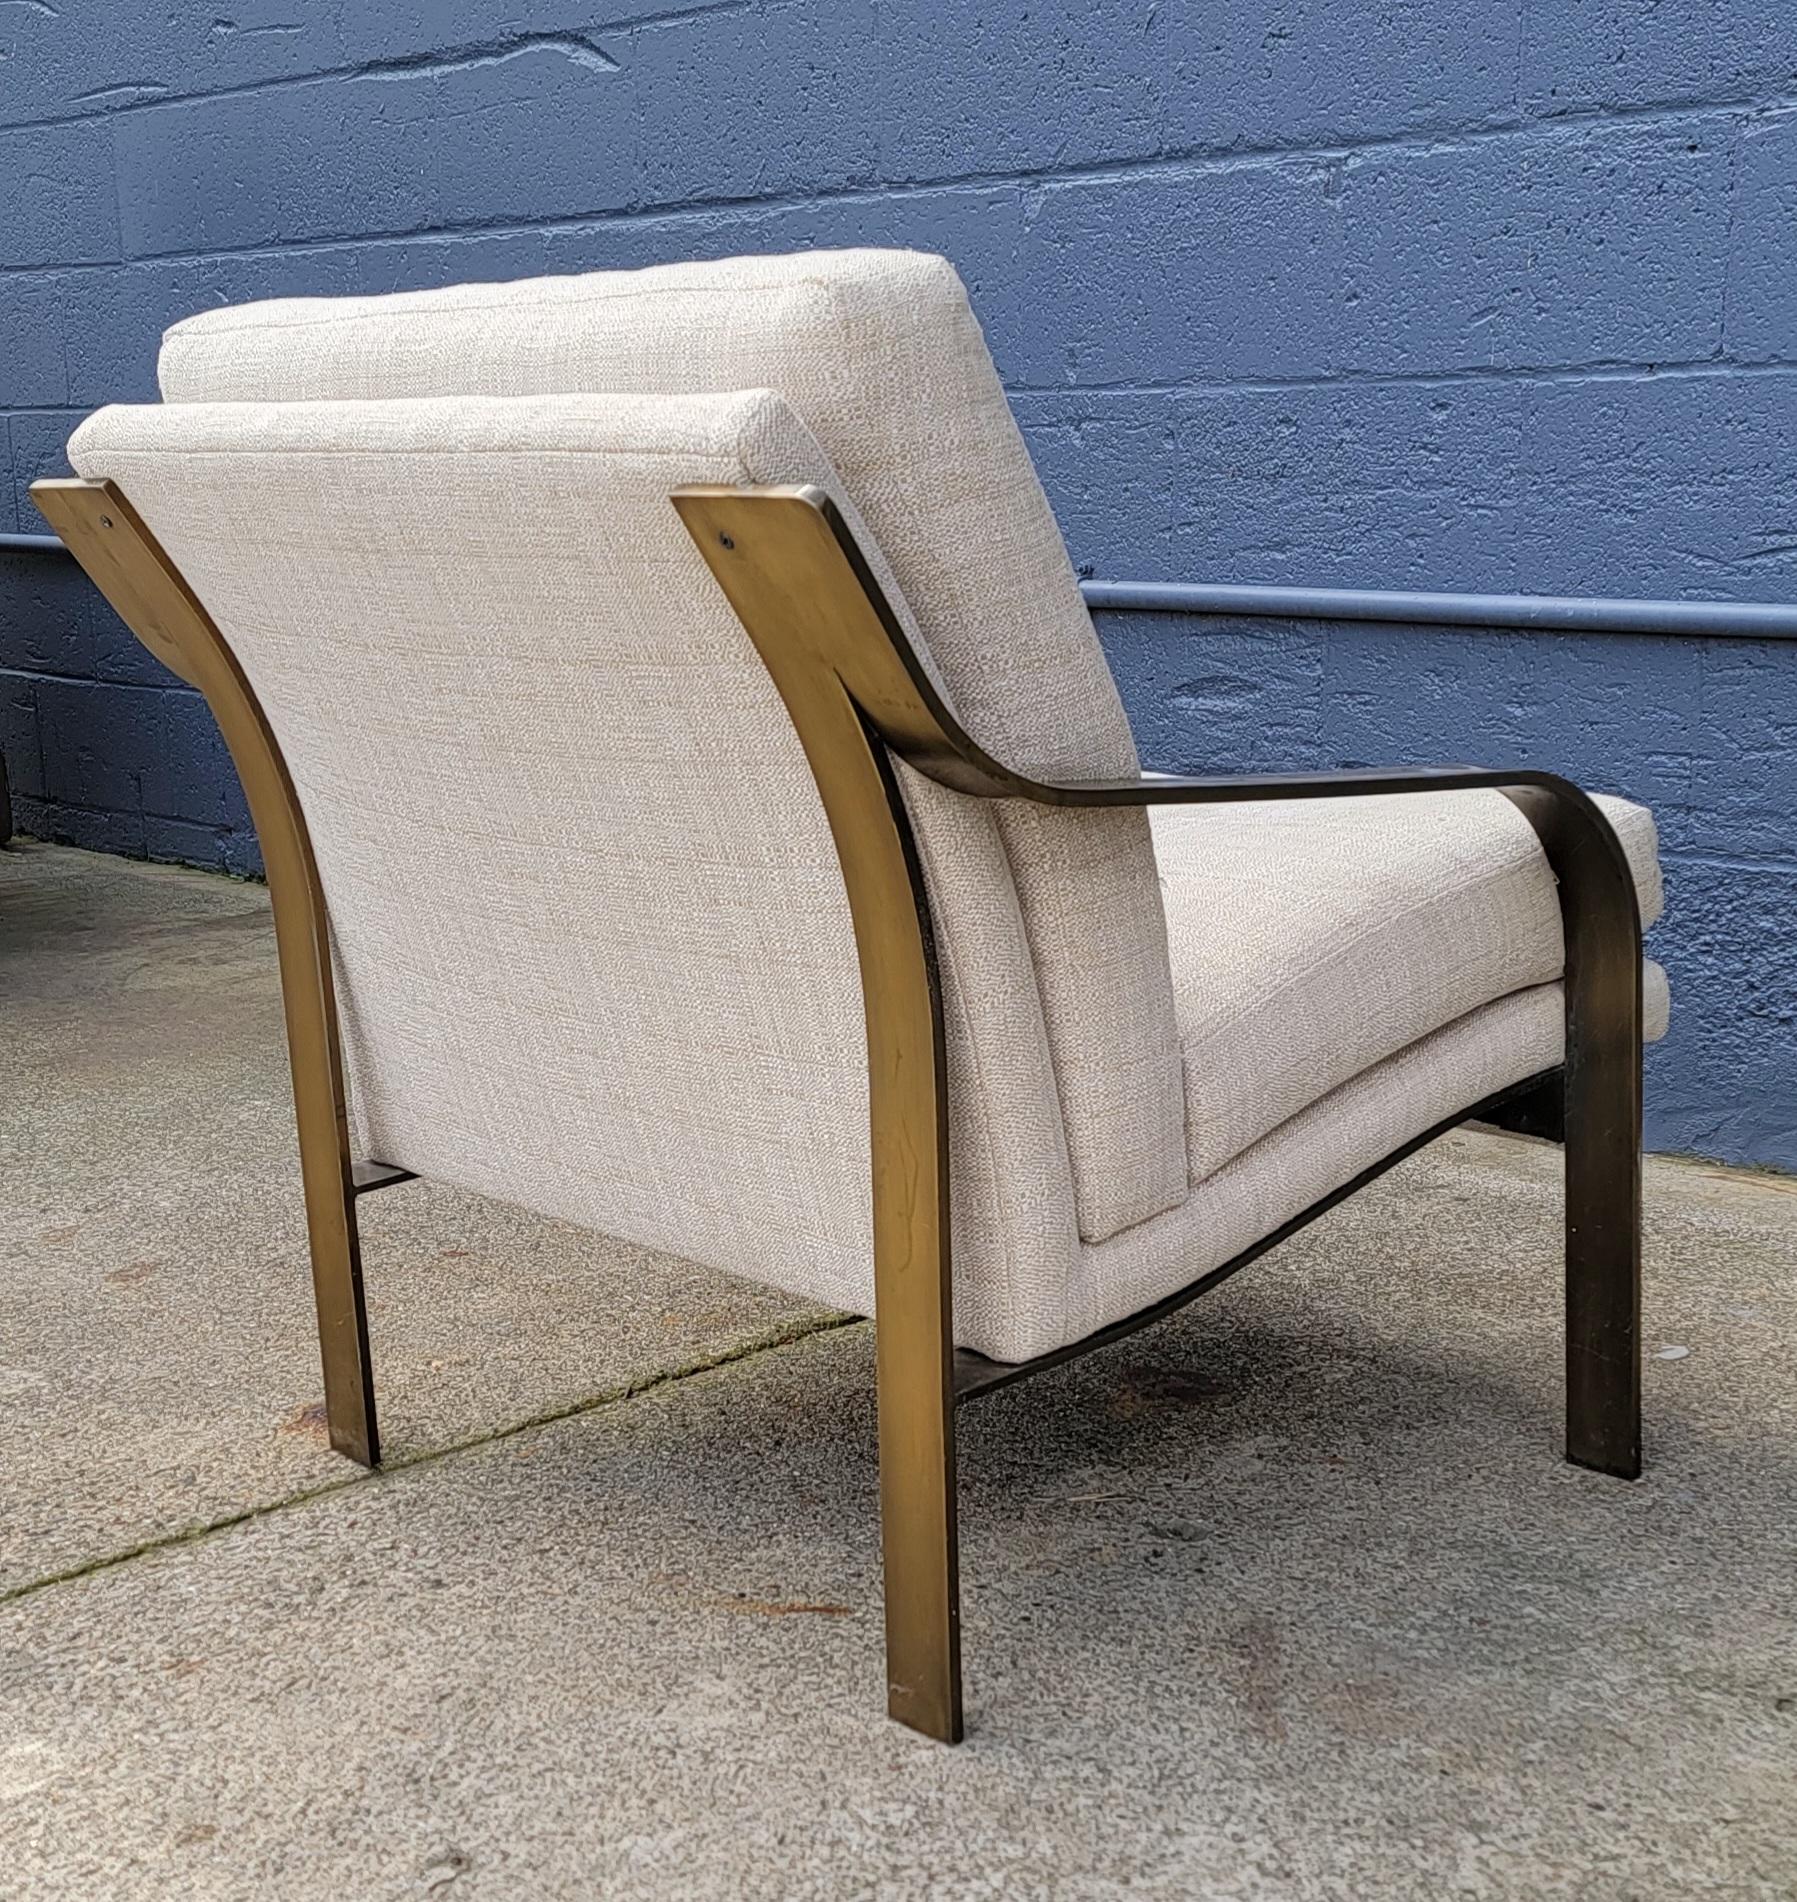 Flat Bar Steel Lounge Chair Manner of Milo Baughman In Fair Condition For Sale In Fulton, CA